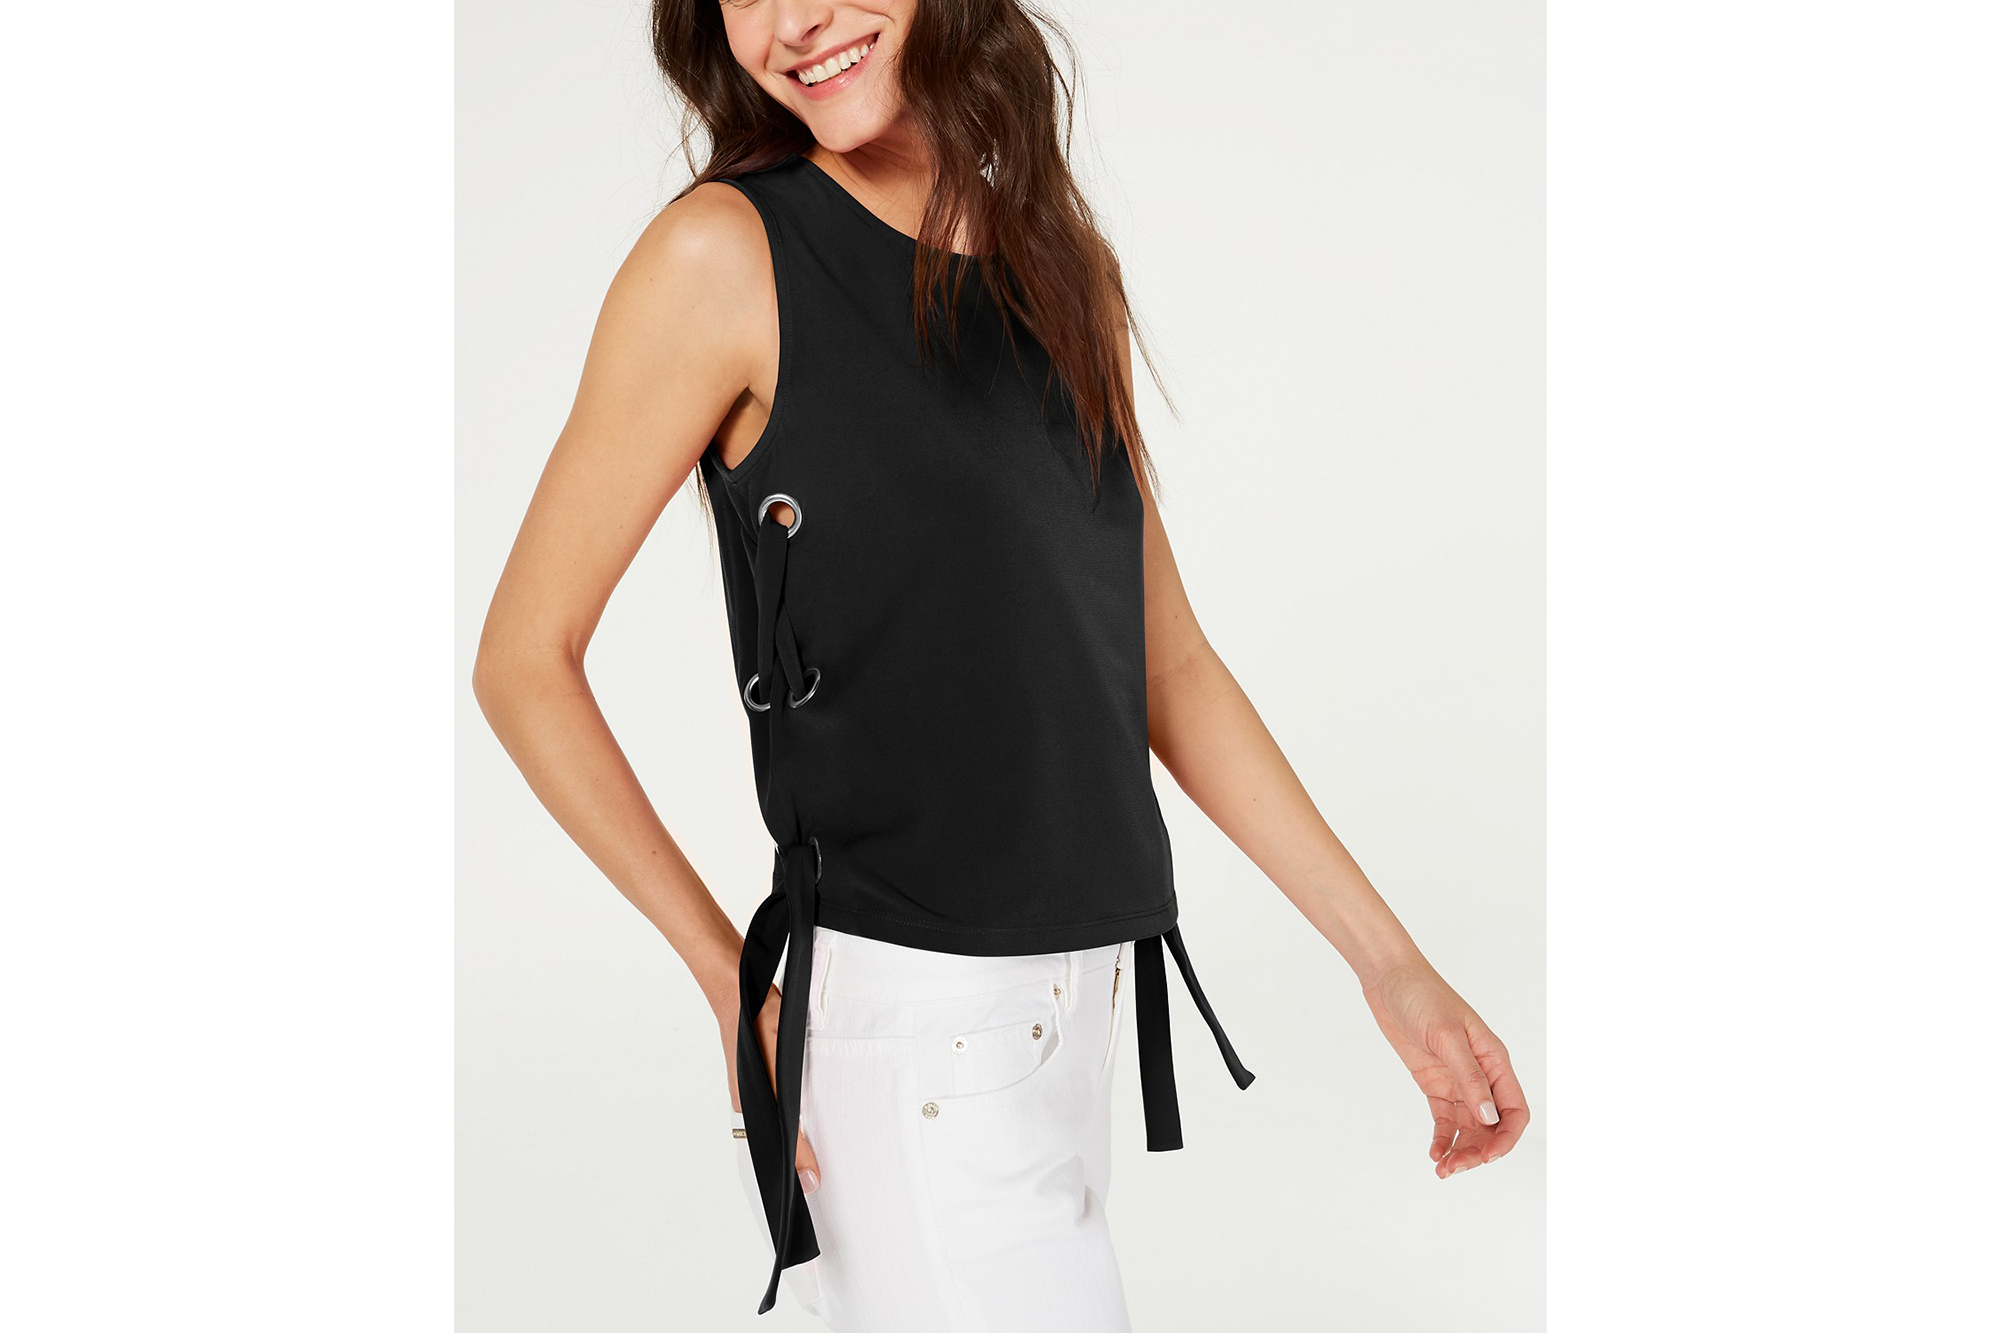 Reviewers Love How 'Cute' This Top-Rated Top Is — and It's 74% Off!